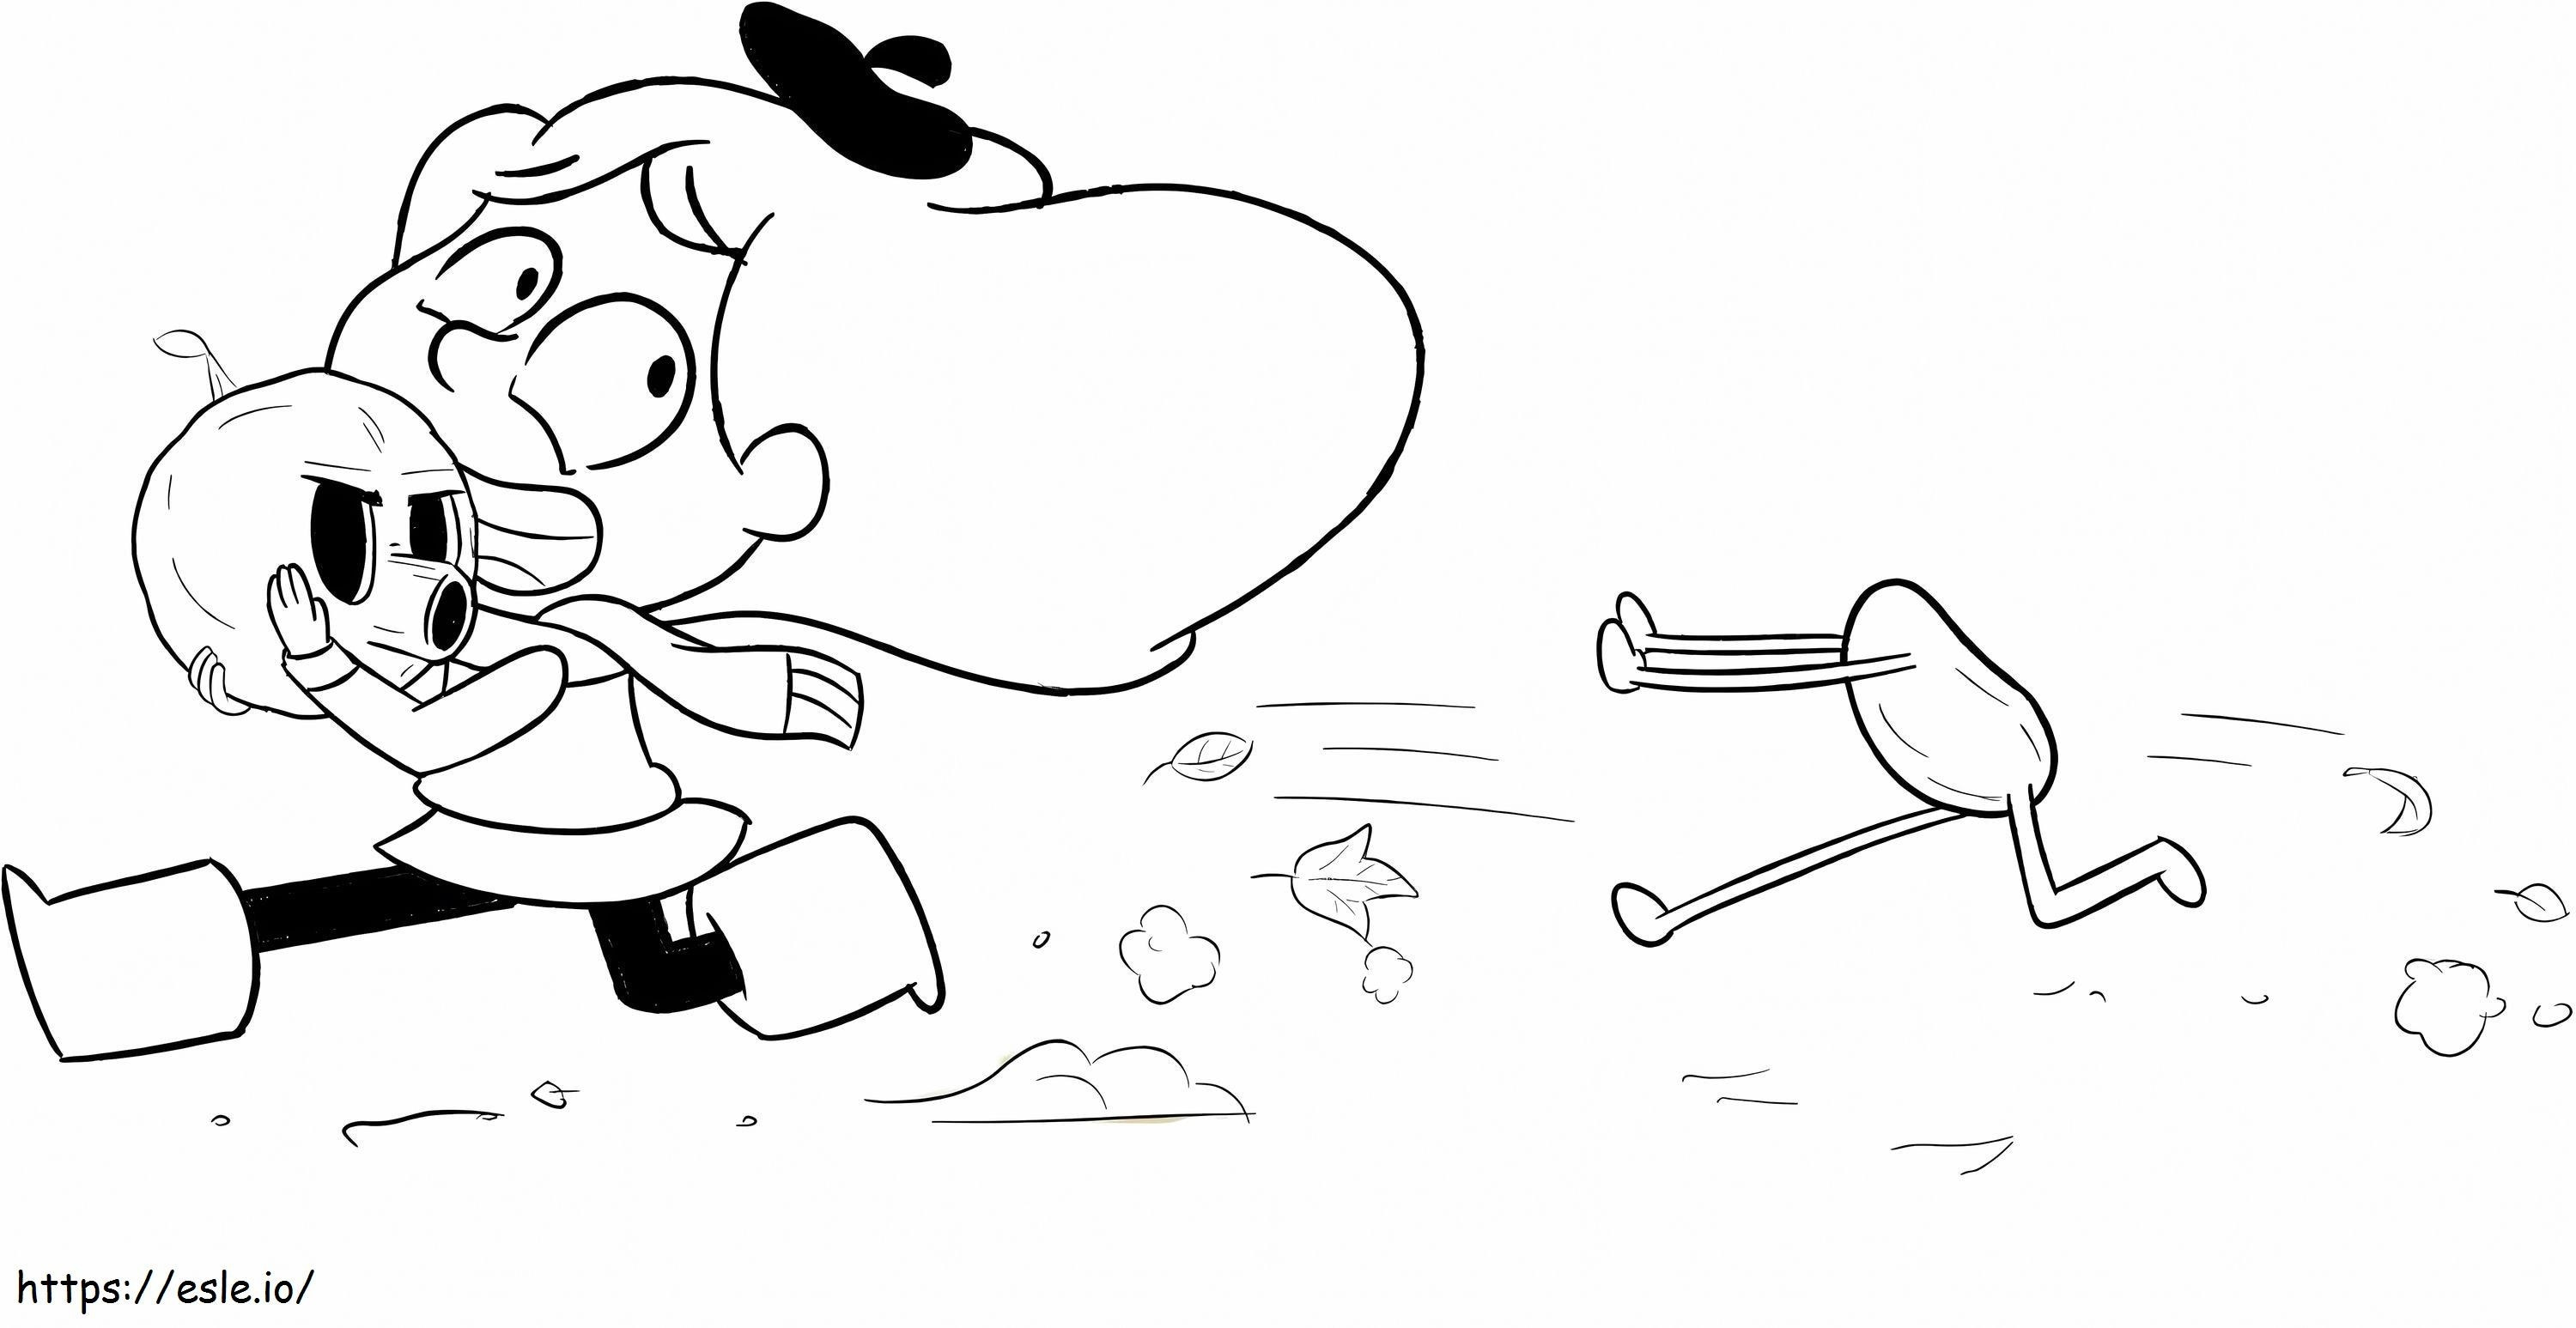 Hilda Running And Scared coloring page